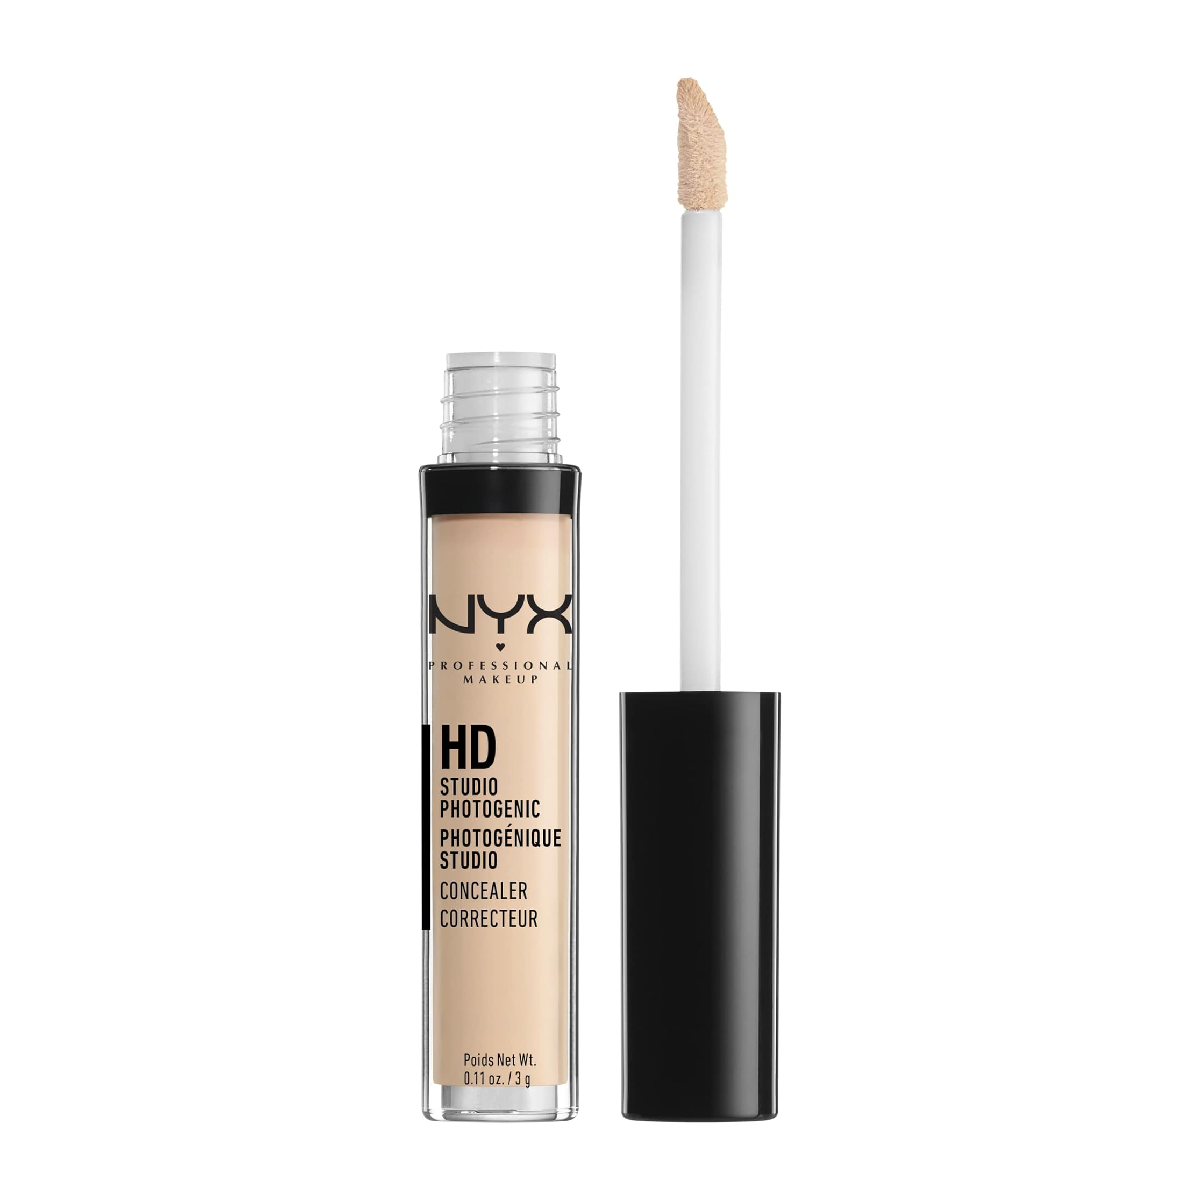 NYX Professional Makeup HD Photogenic Concealer Wand in Fair - a concealer wand on a white background.